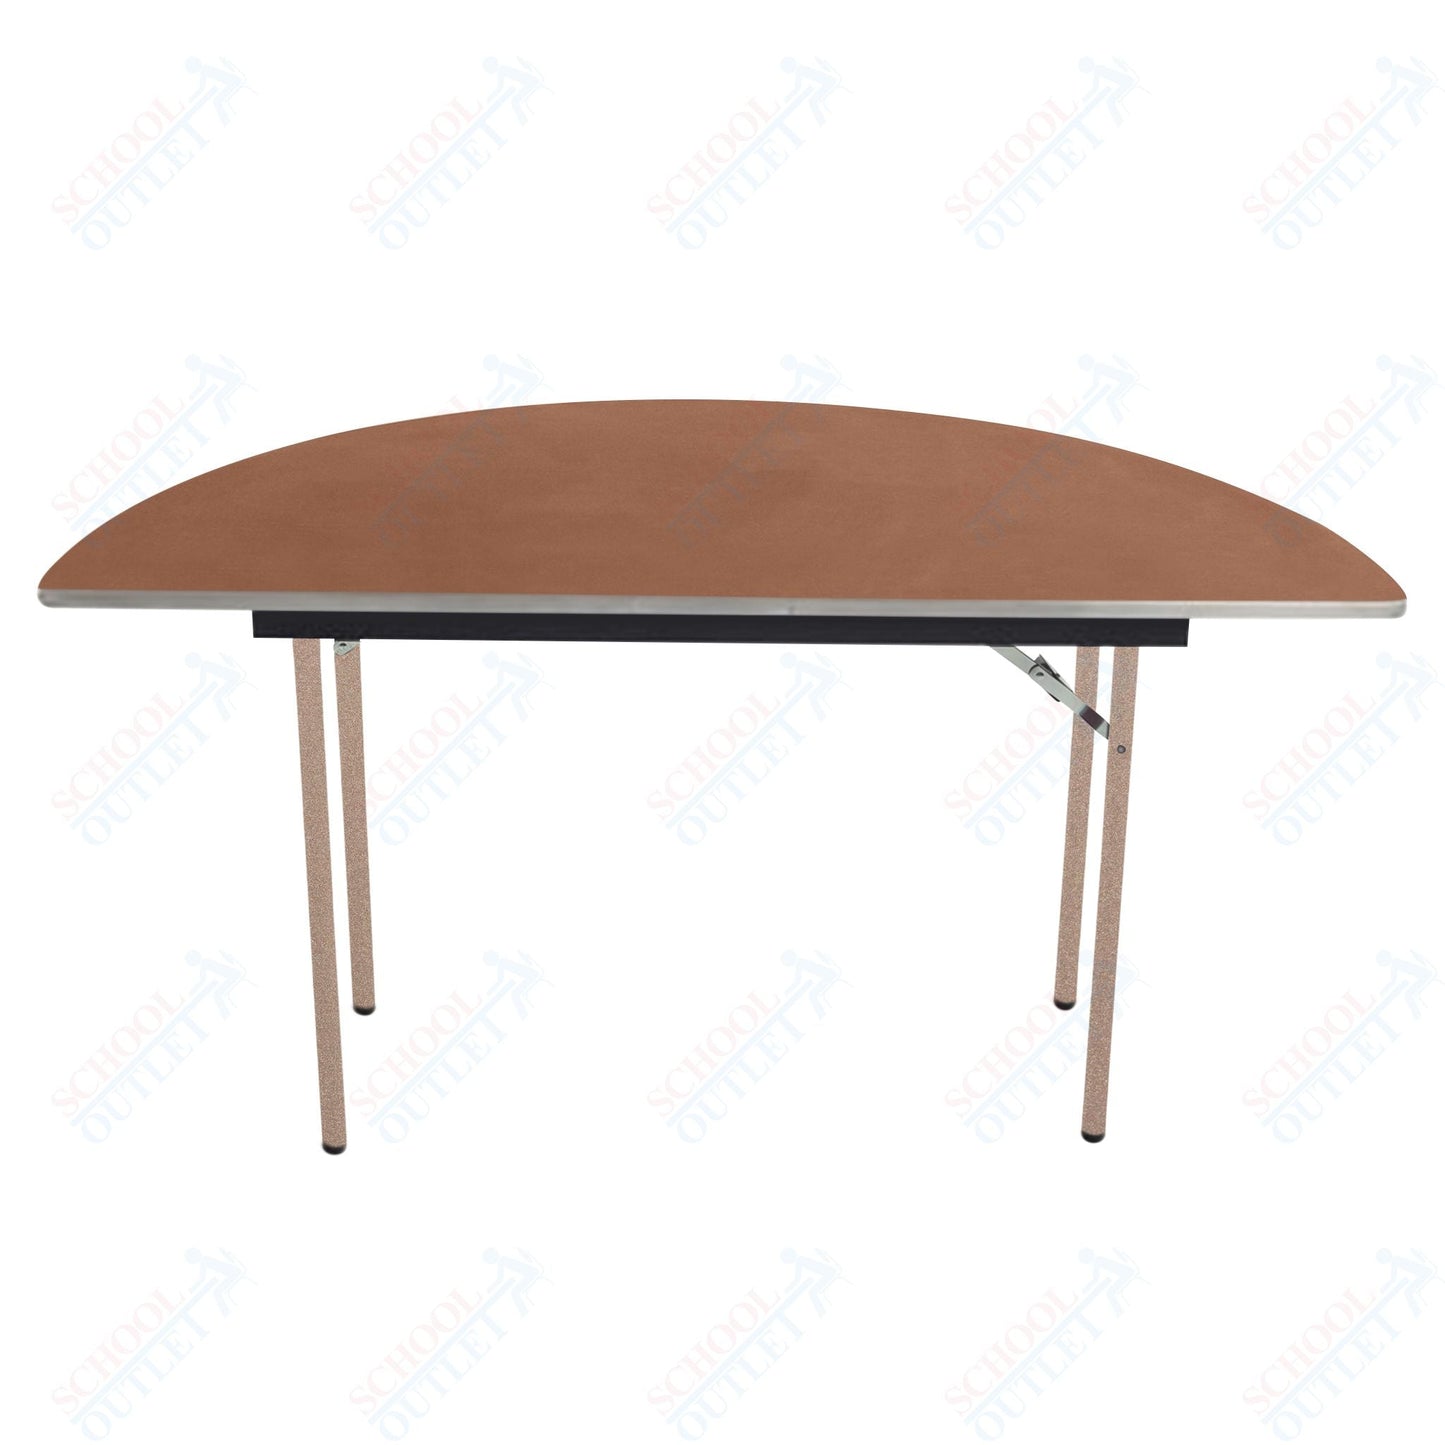 AmTab Folding Table - Plywood Stained and Sealed - Aluminum Edge - Half Round - Half 48" Diameter x 29"H (AmTab AMT - HR48PA) - SchoolOutlet